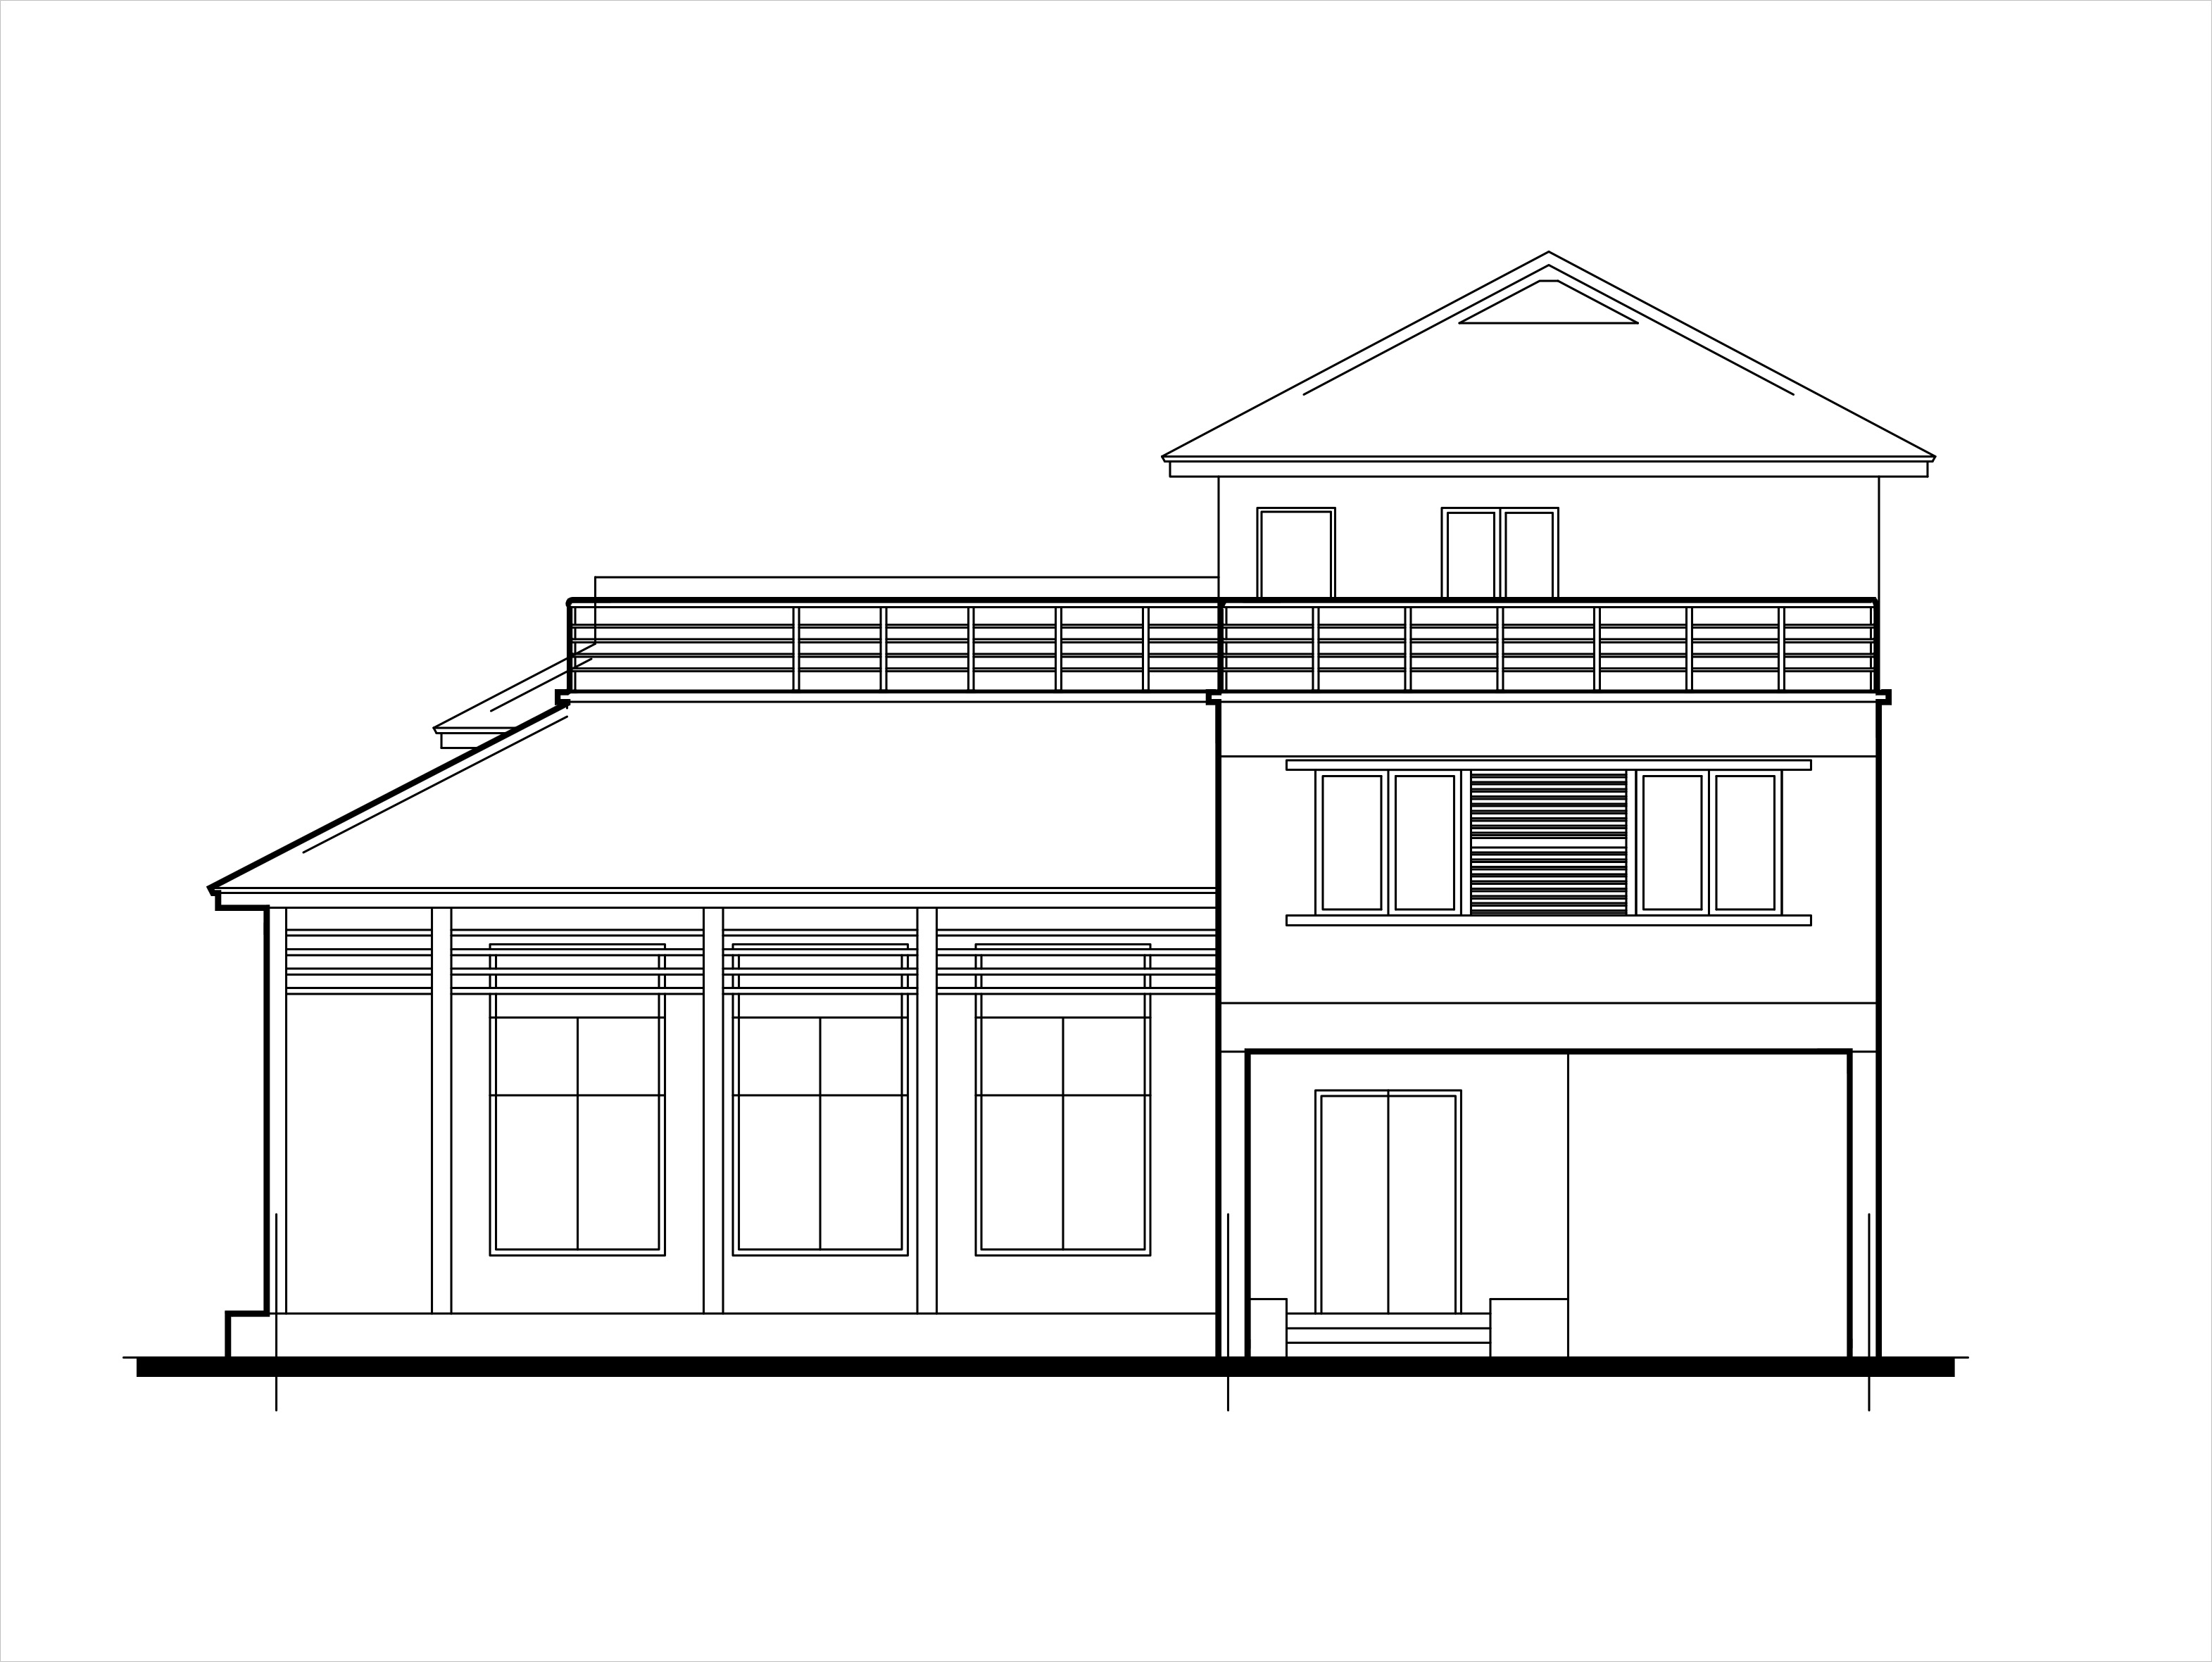 http://www.dwgnet.com/wp-content/uploads/2017/02/Double-story-low-cost-house-plans-front-elevation.jpg